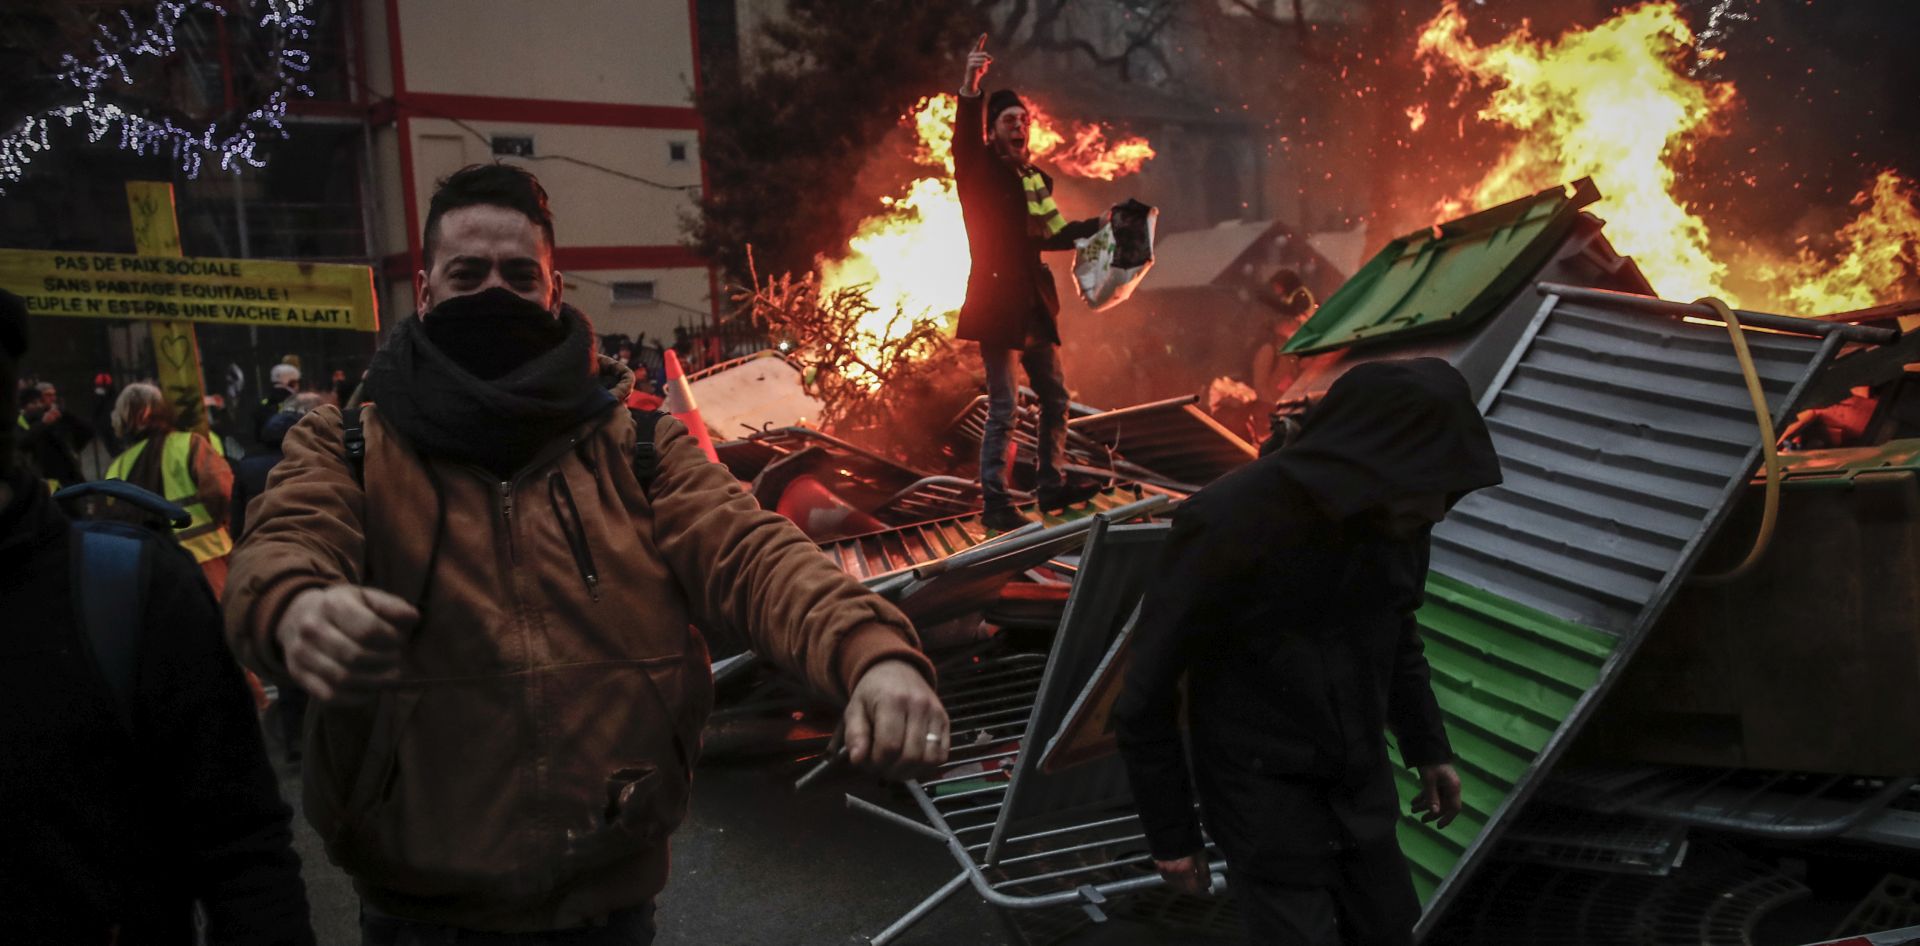 epa07264058 Protesters build a barricade half set on fire as clashes erupt between protesters and the French riot police during a 'Yellow Vests' protest in Paris, France, 05 January 2019. The so-called 'gilets jaunes' (yellow vests) is a grassroots protest movement with supporters from a wide span of the political spectrum, that originally started with protest across the nation in late 2018 against high fuel prices. The movement in the meantime also protests the French government's tax reforms, the increasing costs of living and some even call for the resignation of French President Emmanuel Macron.  EPA/IAN LANGSDON